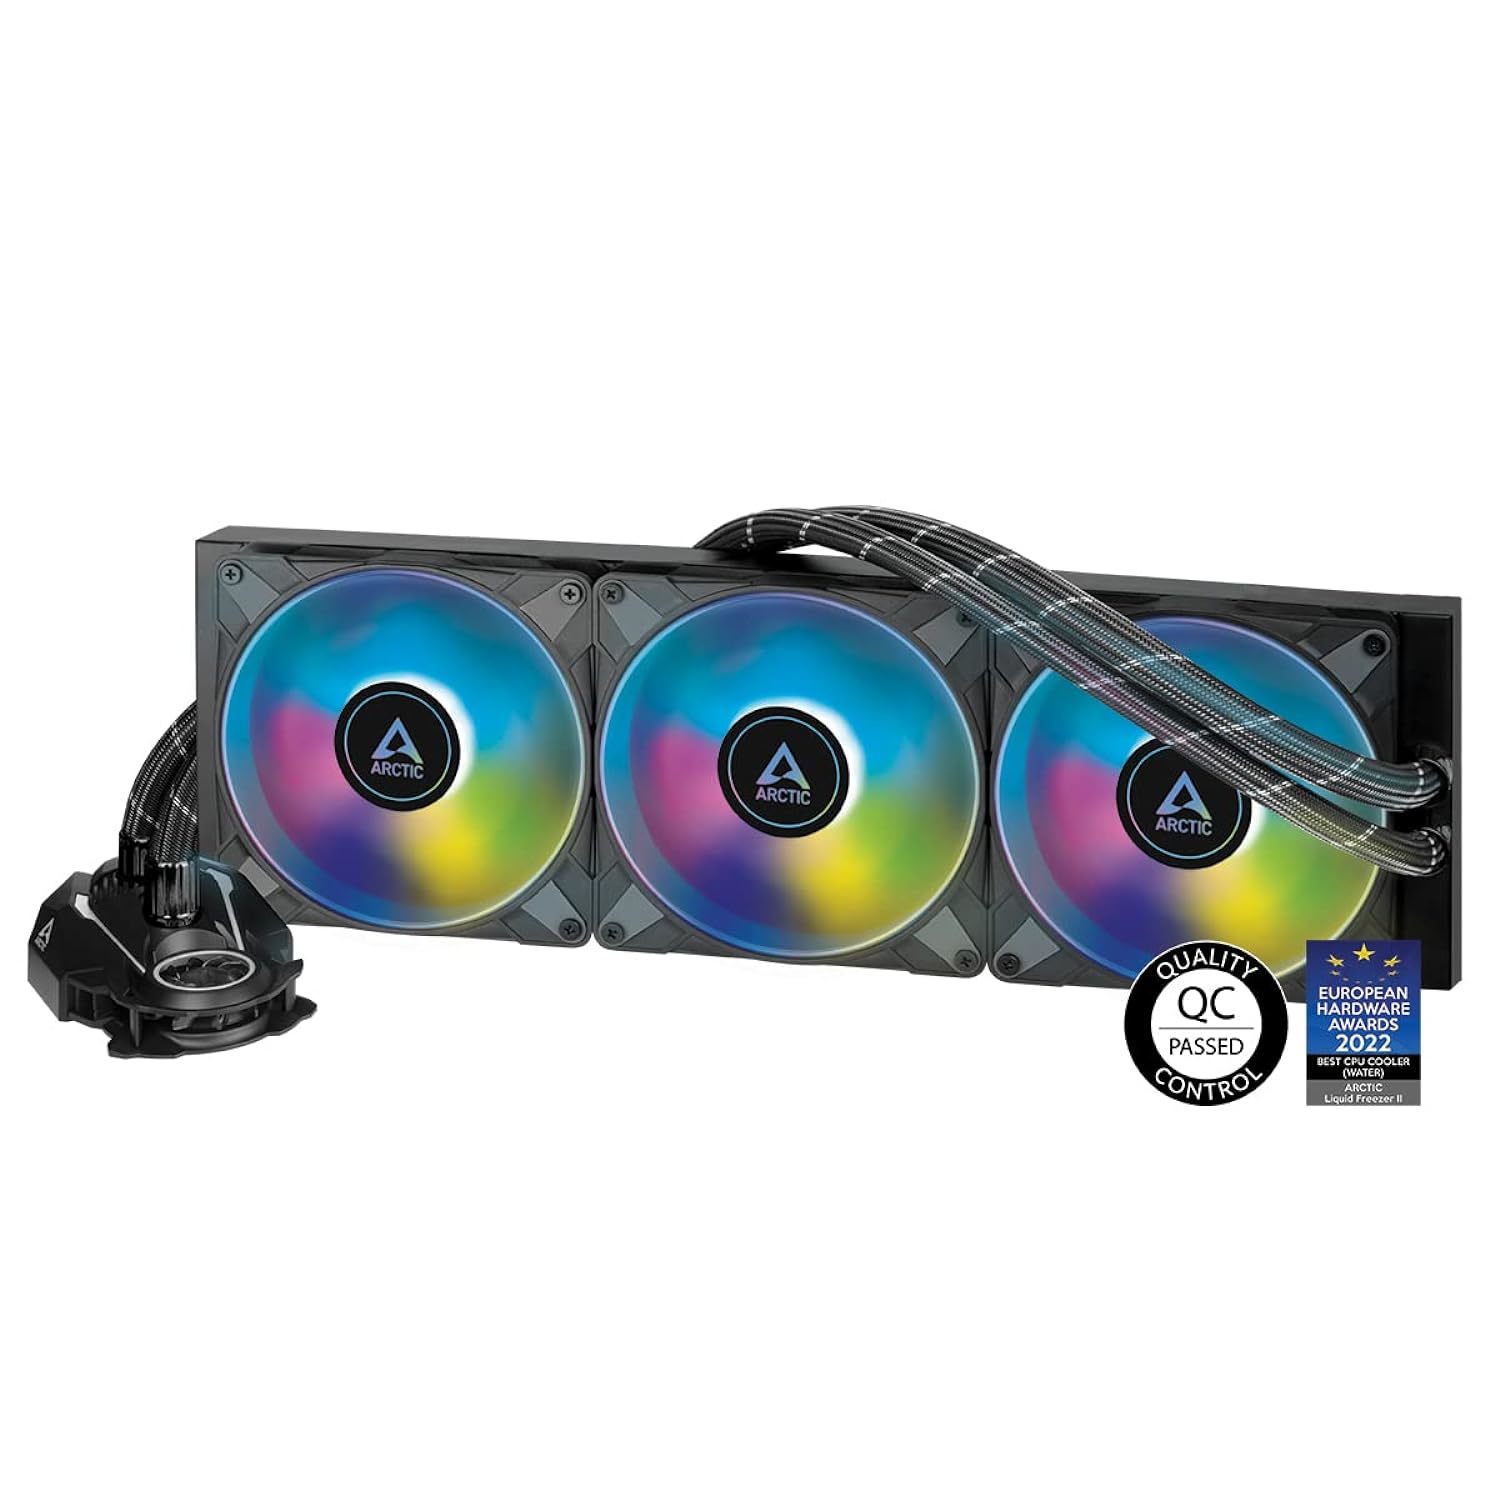 Primary image for ARCTIC Liquid Freezer II 420 A-RGB - Multi-Compatible All-in-one CPU AIO Water C